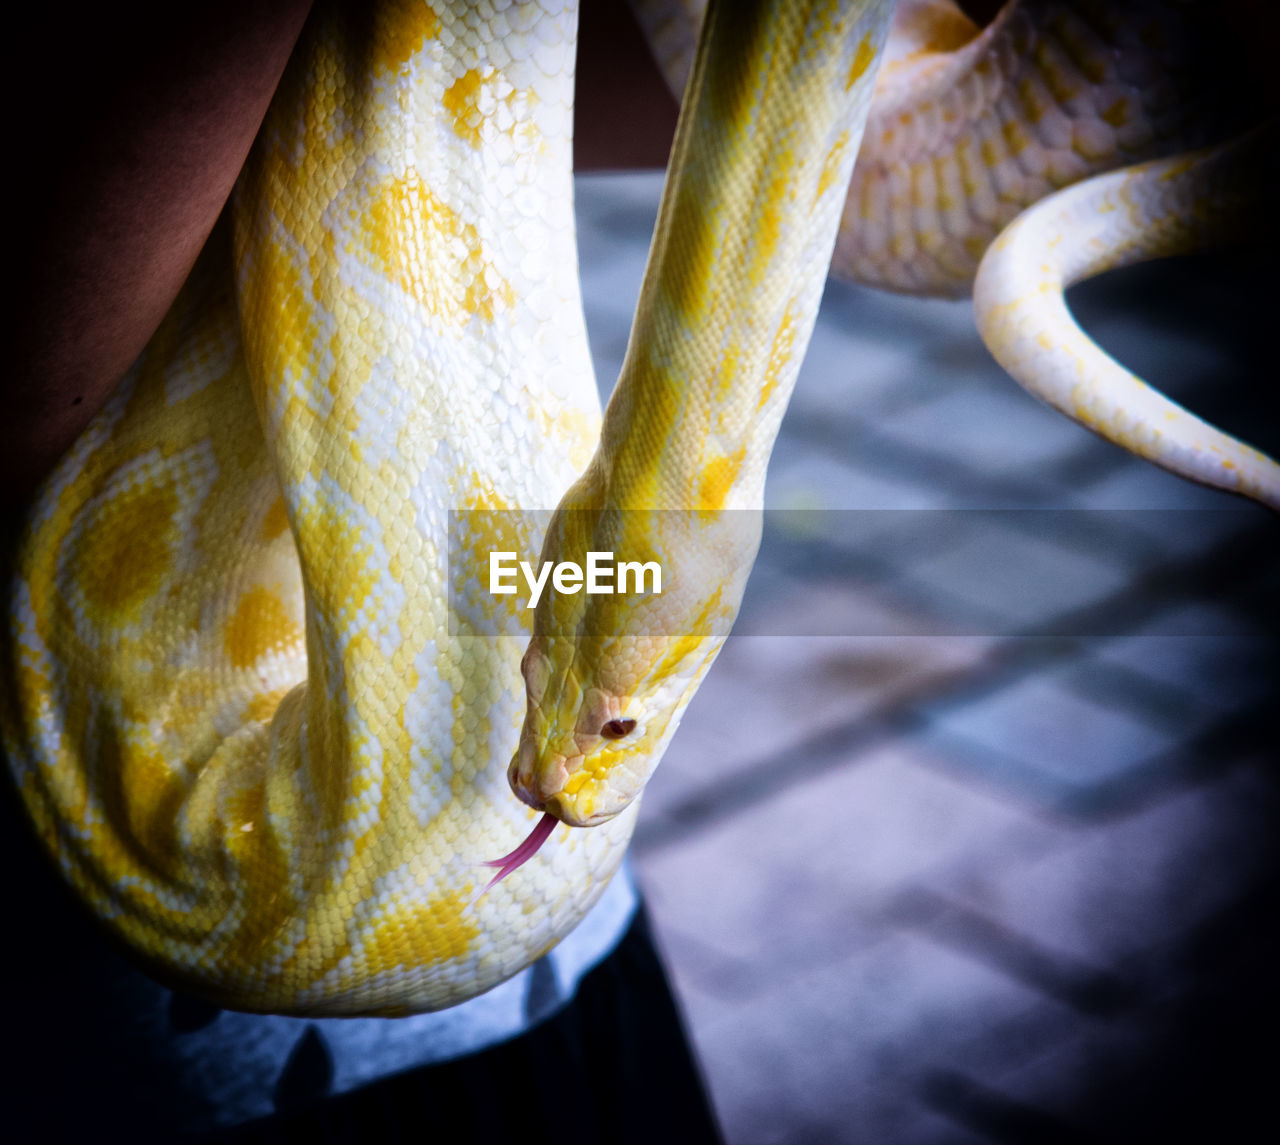 CLOSE UP VIEW OF YELLOW SNAKE